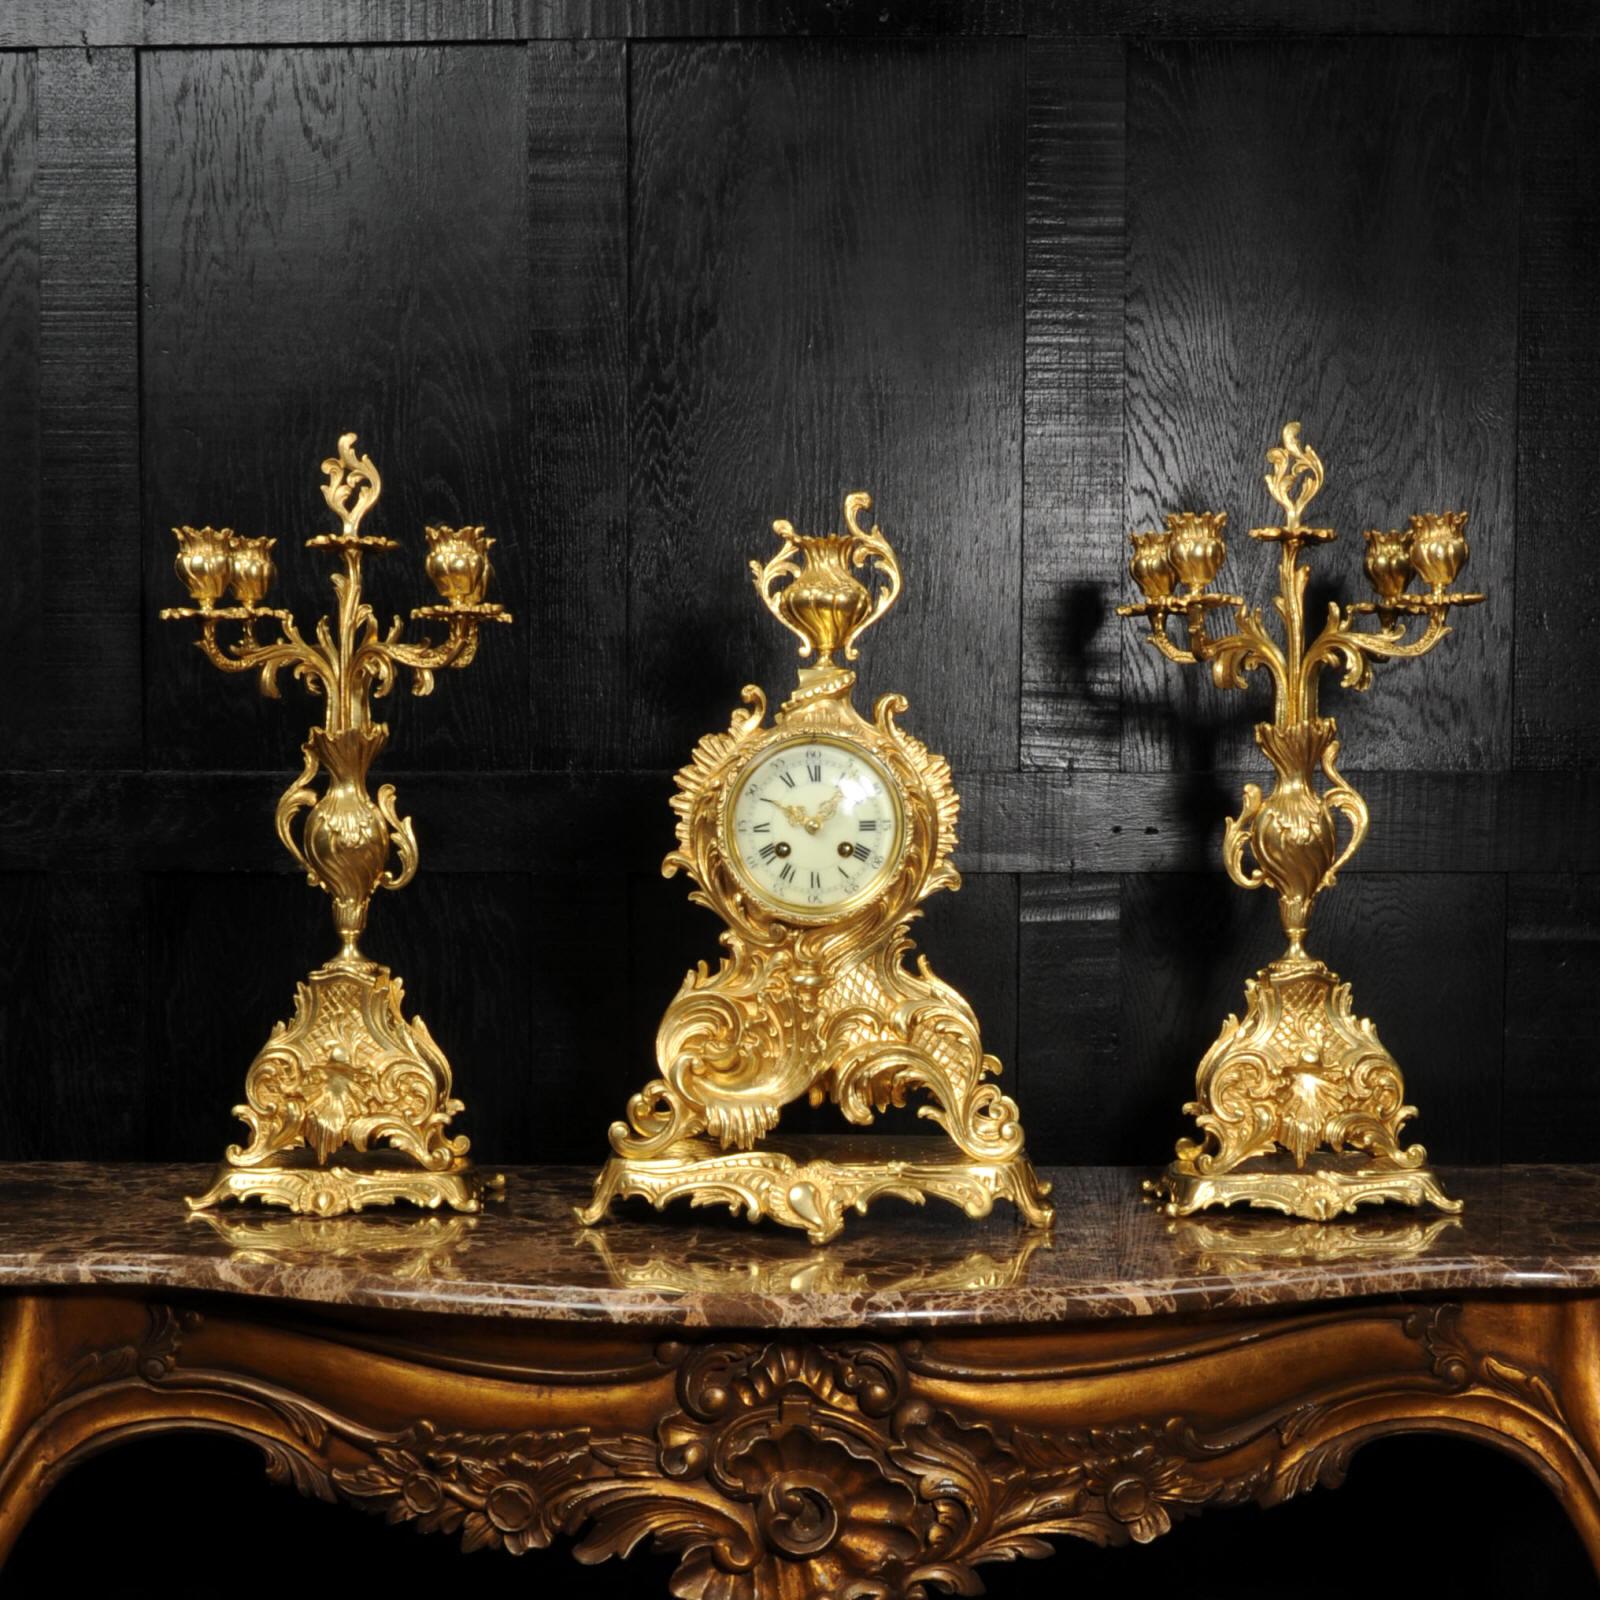 A stunning and large original antique French gilded bronze clock set. It is of the most beautiful Rococo style, waisted case decorated with bold 'C' scrolls, acanthus leaves and standing on an integral base. To the top is a Rococo urn.  Candelabra